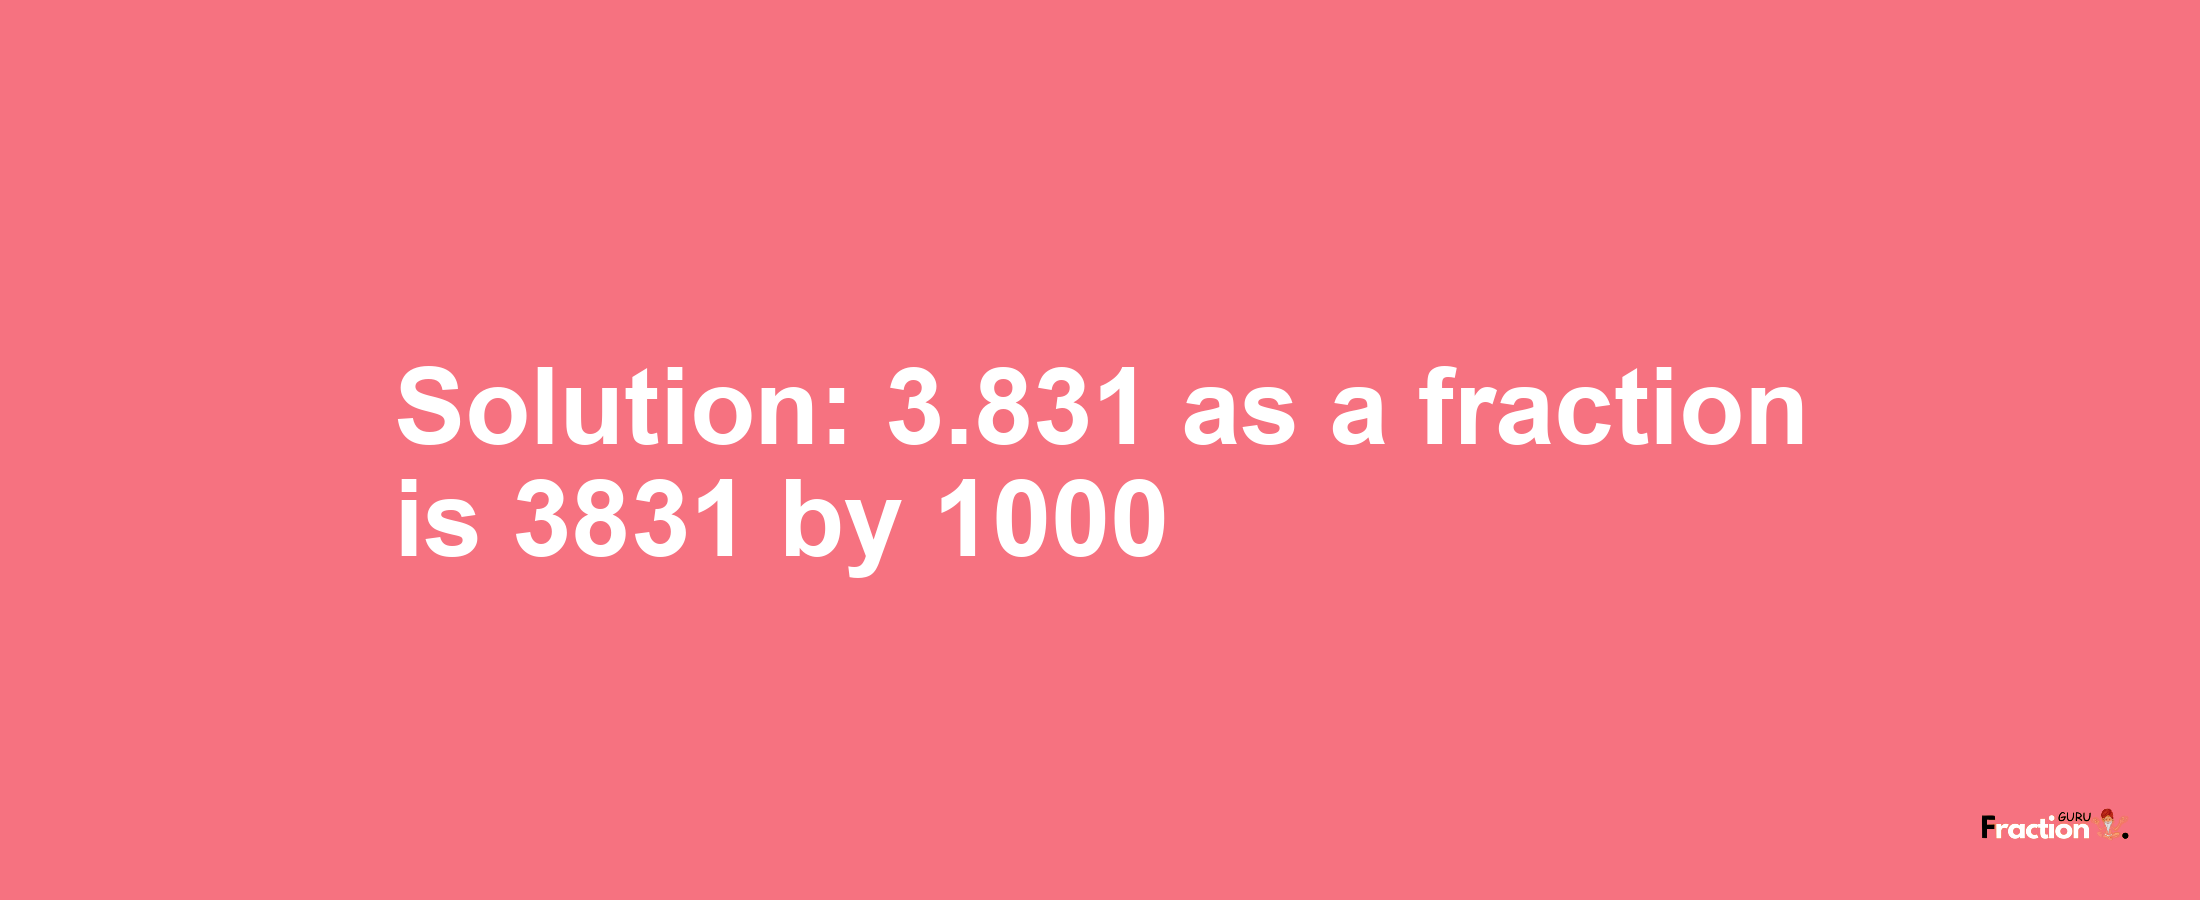 Solution:3.831 as a fraction is 3831/1000